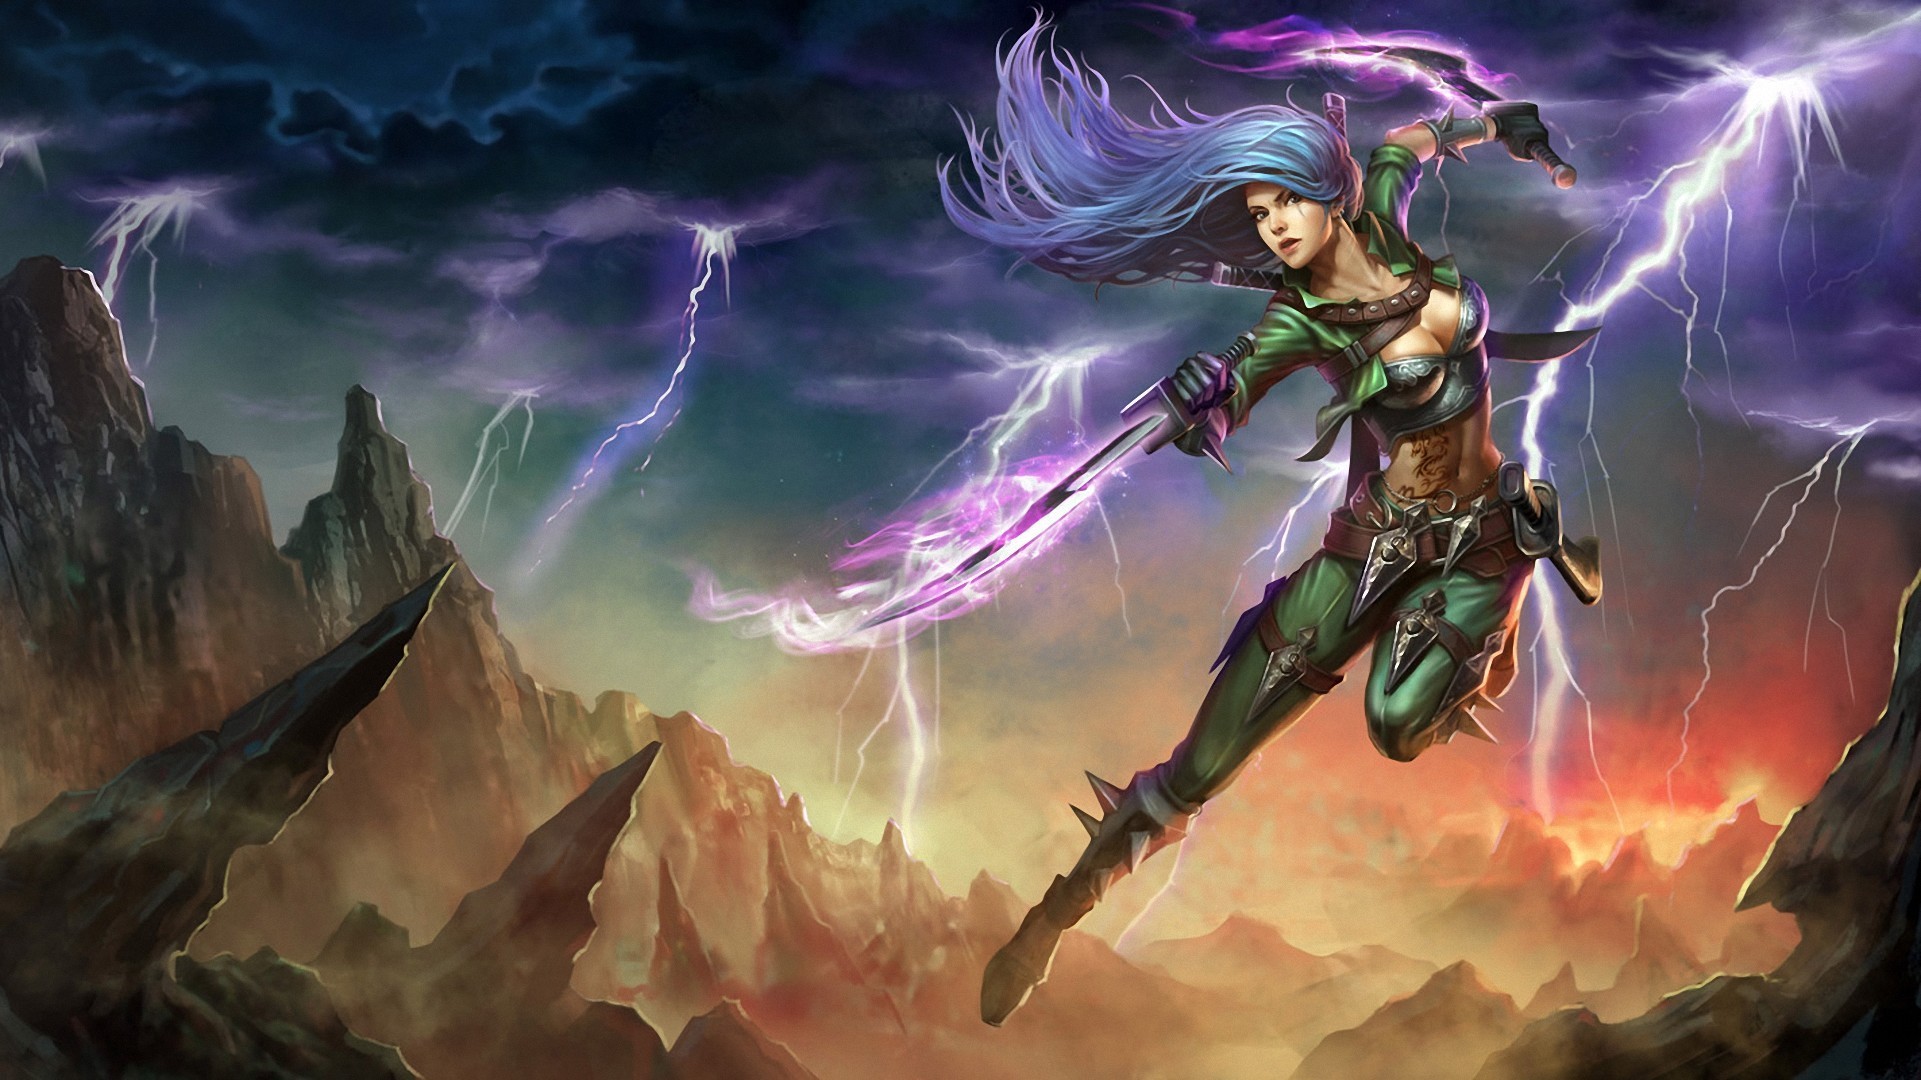 General 1921x1080 fantasy art League of Legends Katarina (League of Legends) PC gaming video game art boobs long hair purple hair women with swords sword weapon video game girls fantasy girl